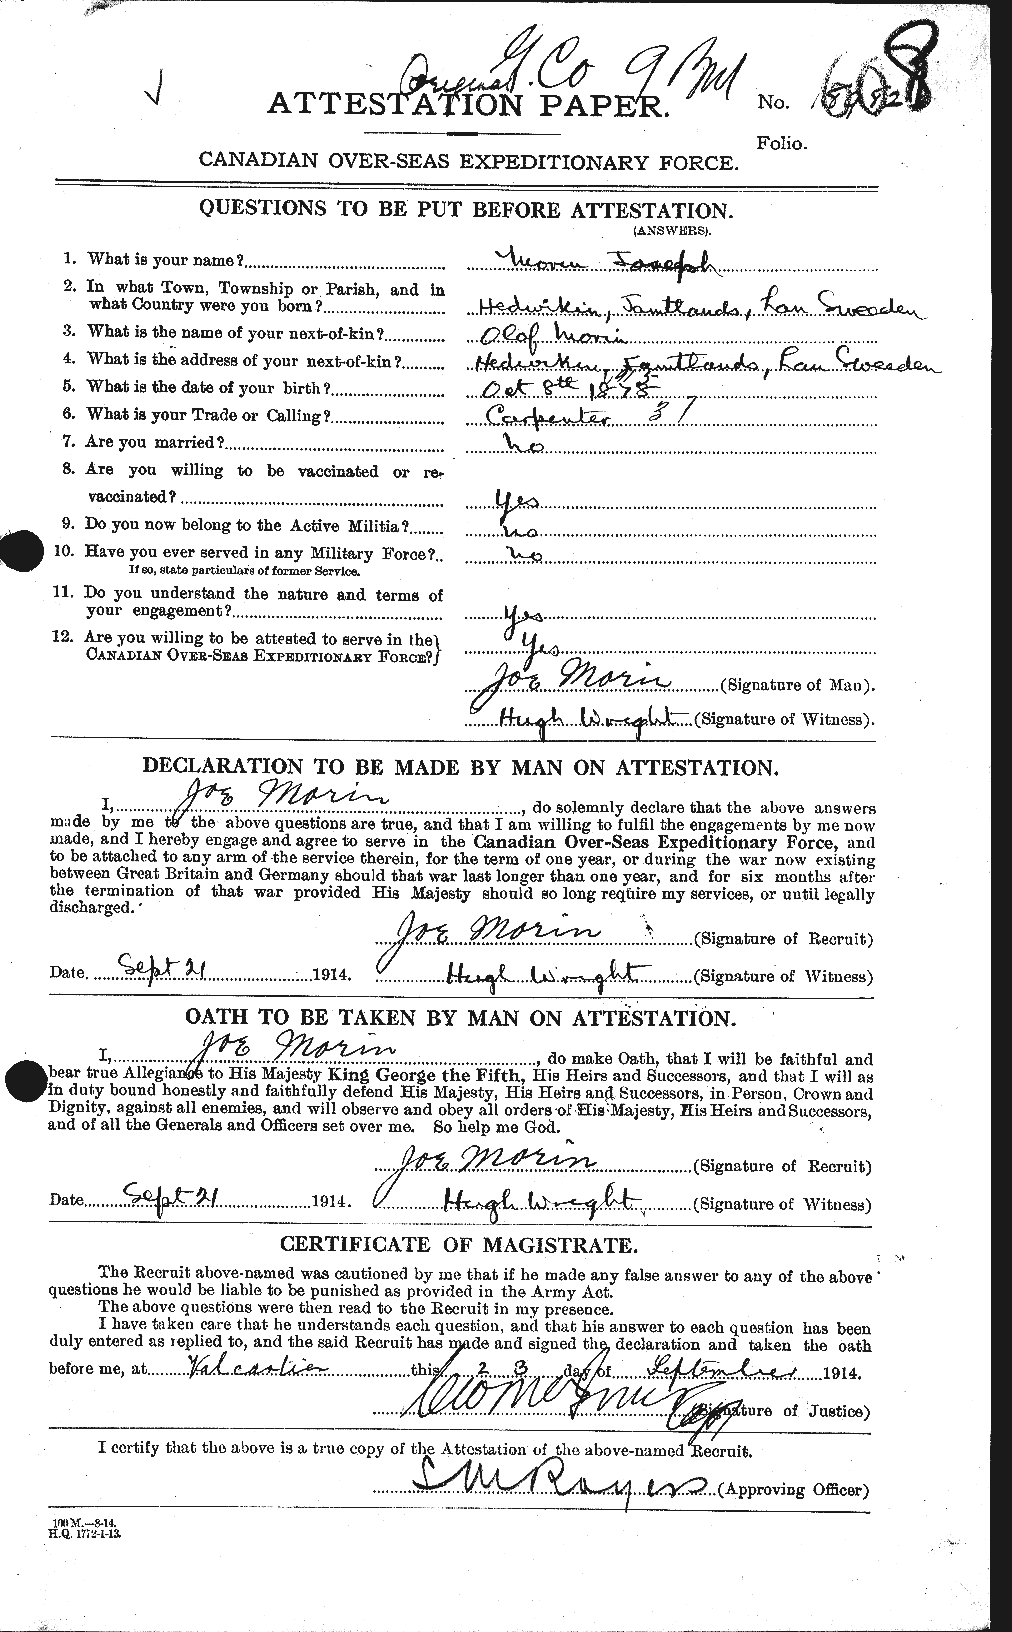 Personnel Records of the First World War - CEF 507342a